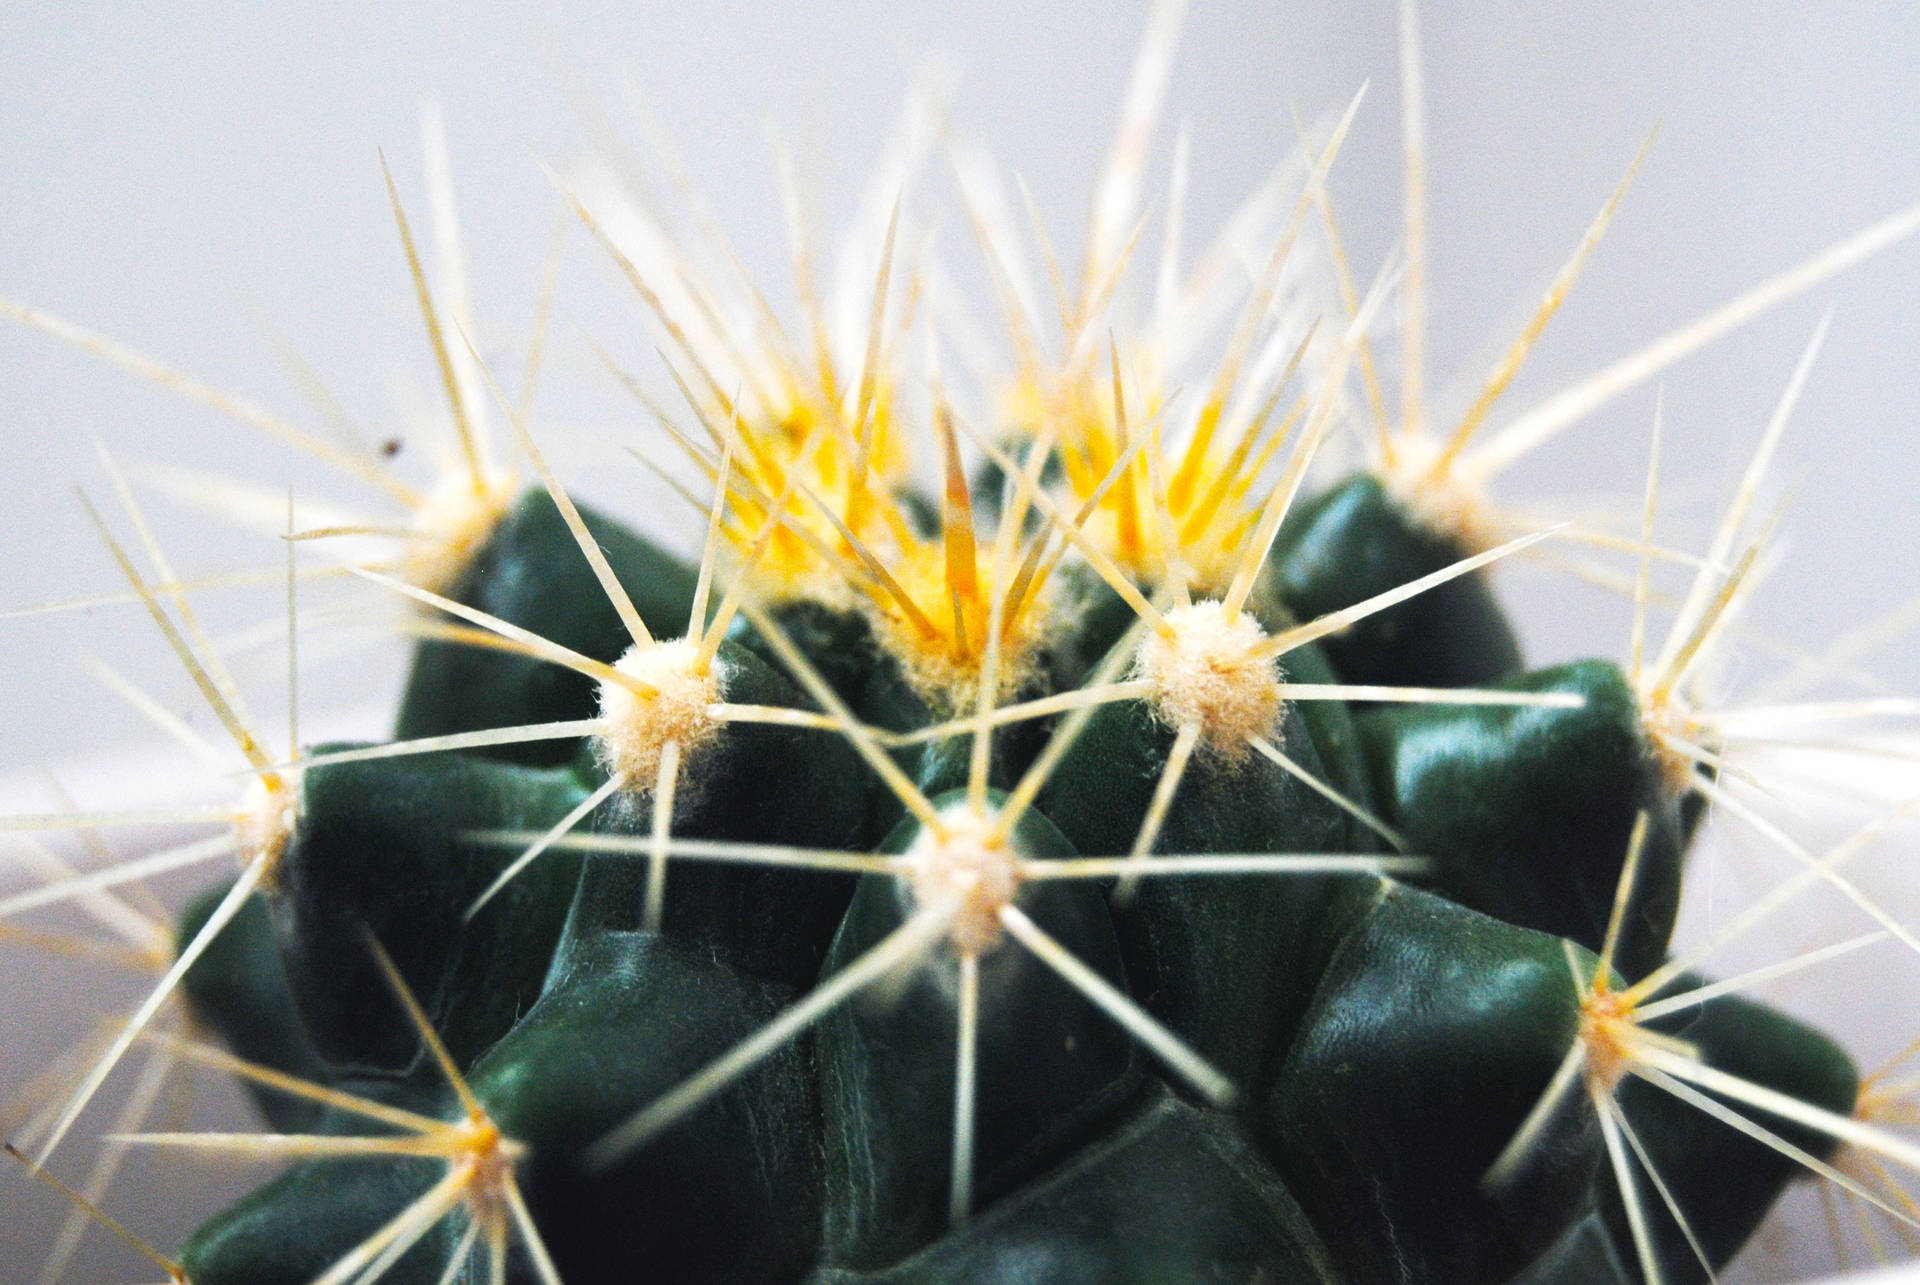 Cactus 3809X2550 Wallpaper and Background Image